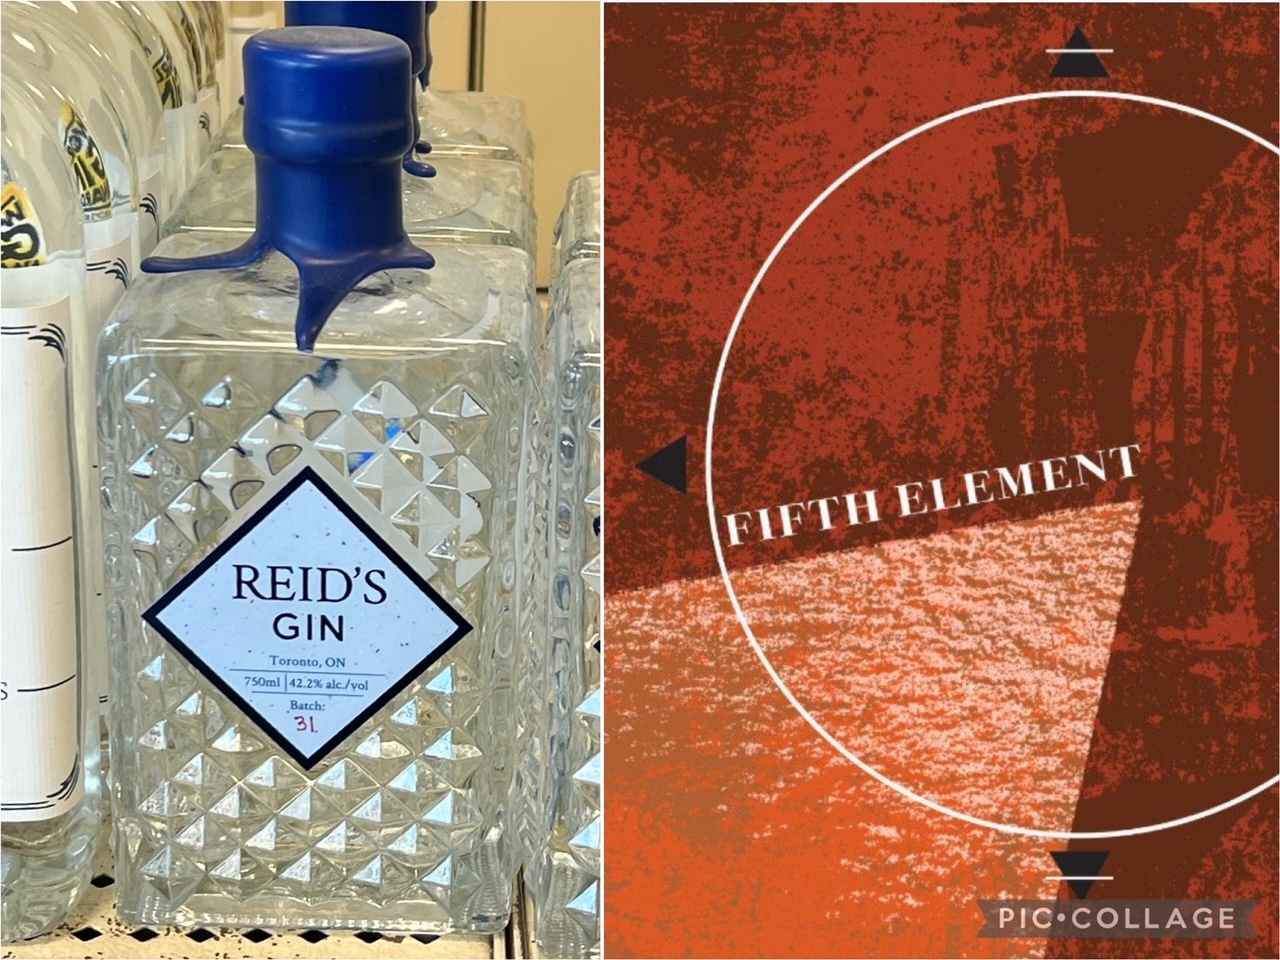 Gin & Jazz with Fifth Element at Reid’s Distillery